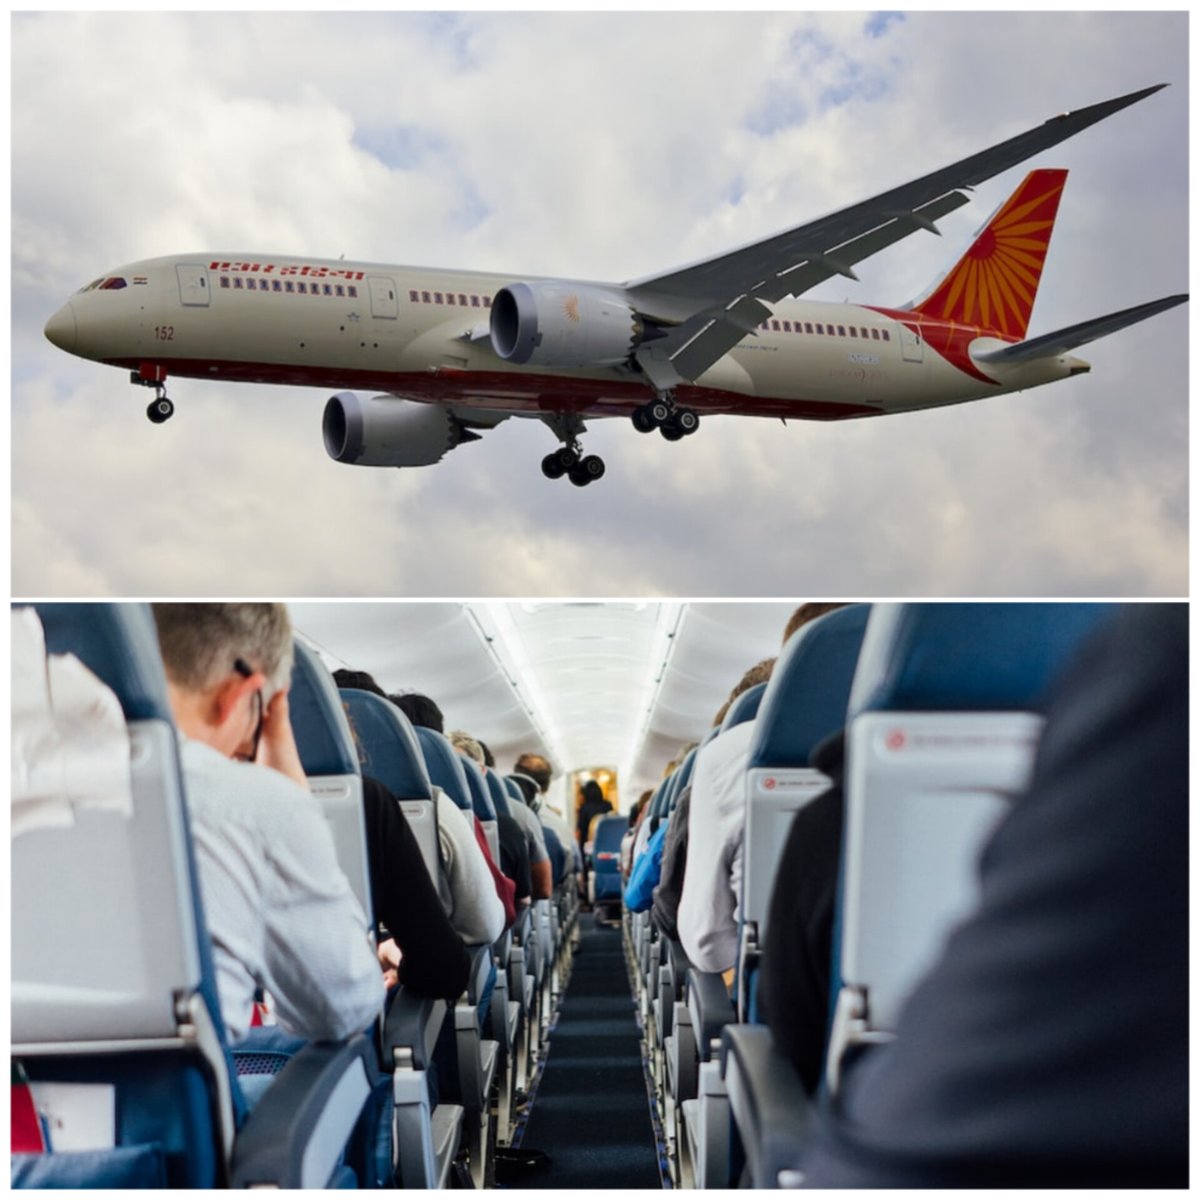 #India soars back to pre-pandemic international air travel levels in H1 FY24! #Tata airlines lead with 23.5% market share, while domestic carriers gain at 44.3%. 
Read more on shorts91.com/category/india…

#IndiaAviation #internationalAirTravel #DomesticFlight #TataAirlines